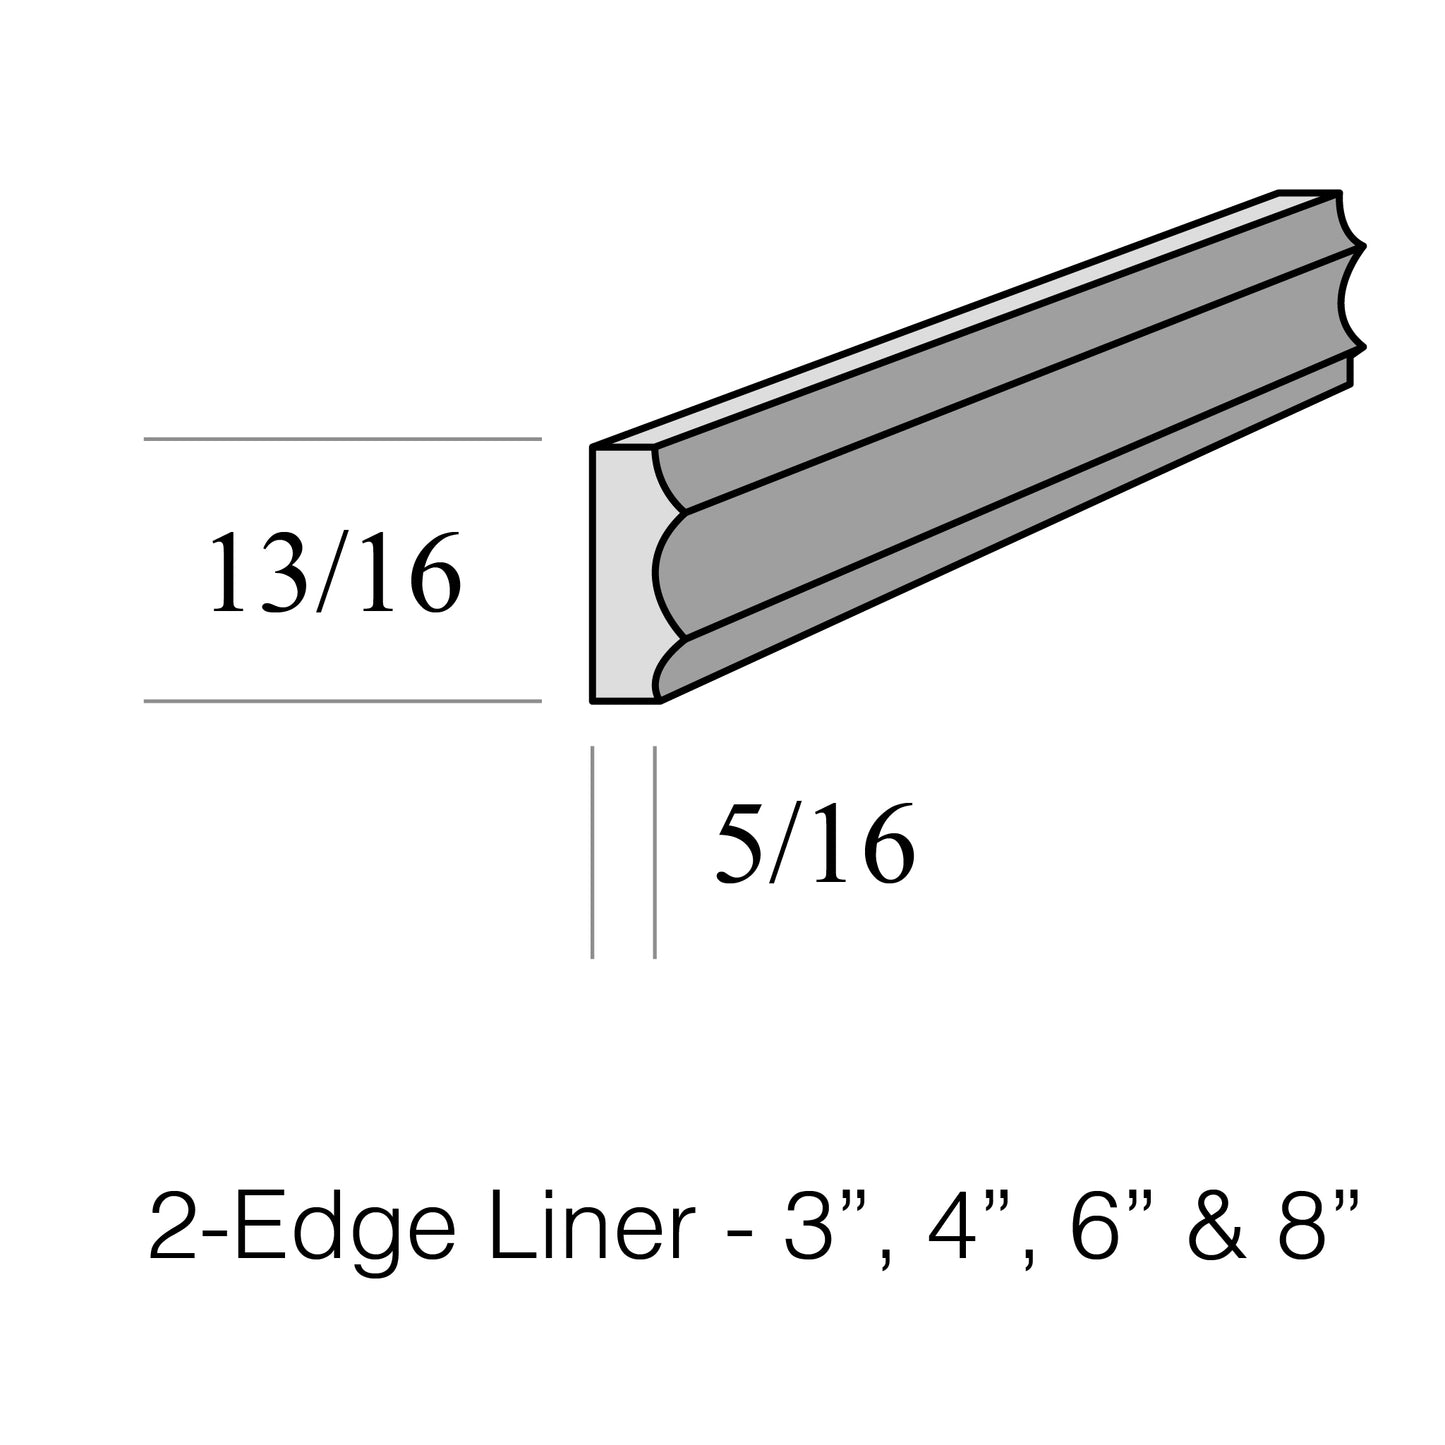 Two-Edge Liner 3"